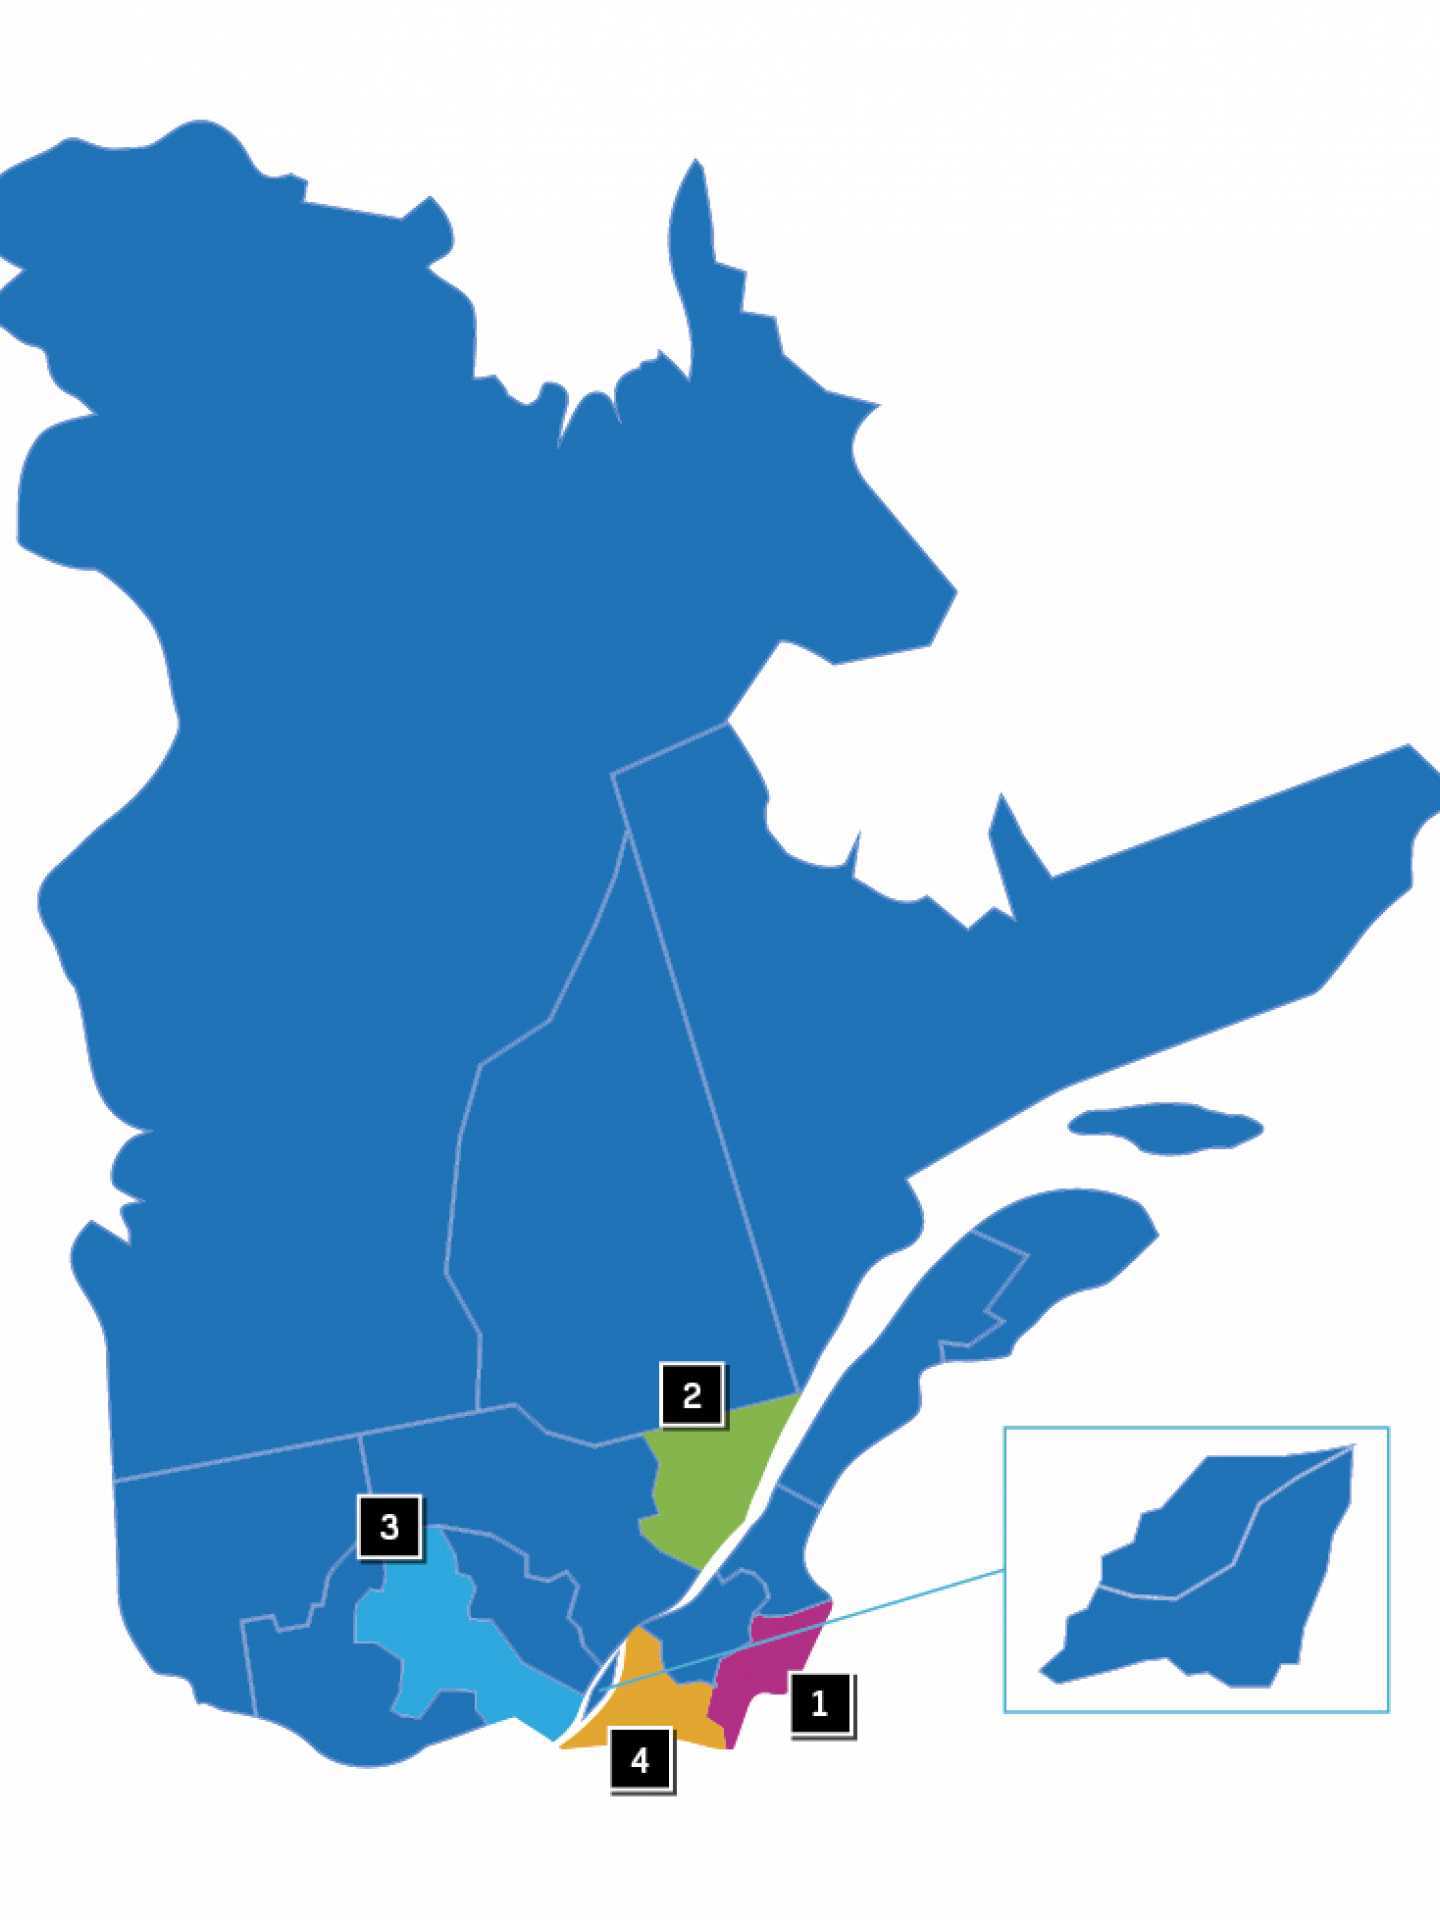 A map of Québec's gourmet routes